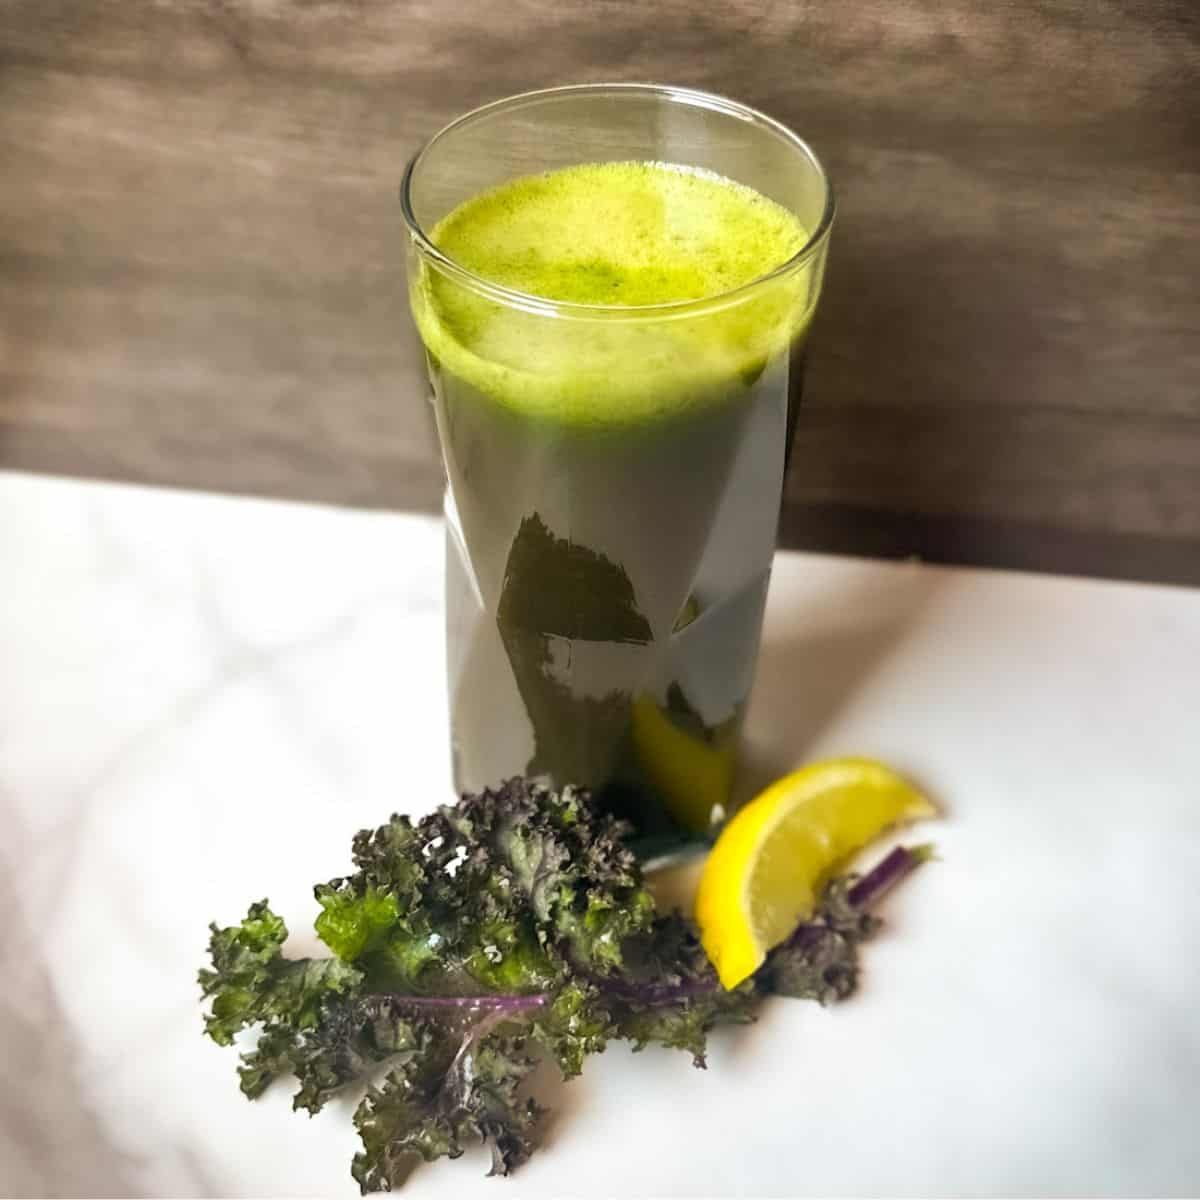 A clear tall glass of green juice (kale tonic) with a kale leaf and lemon wedge at the base for garnish.